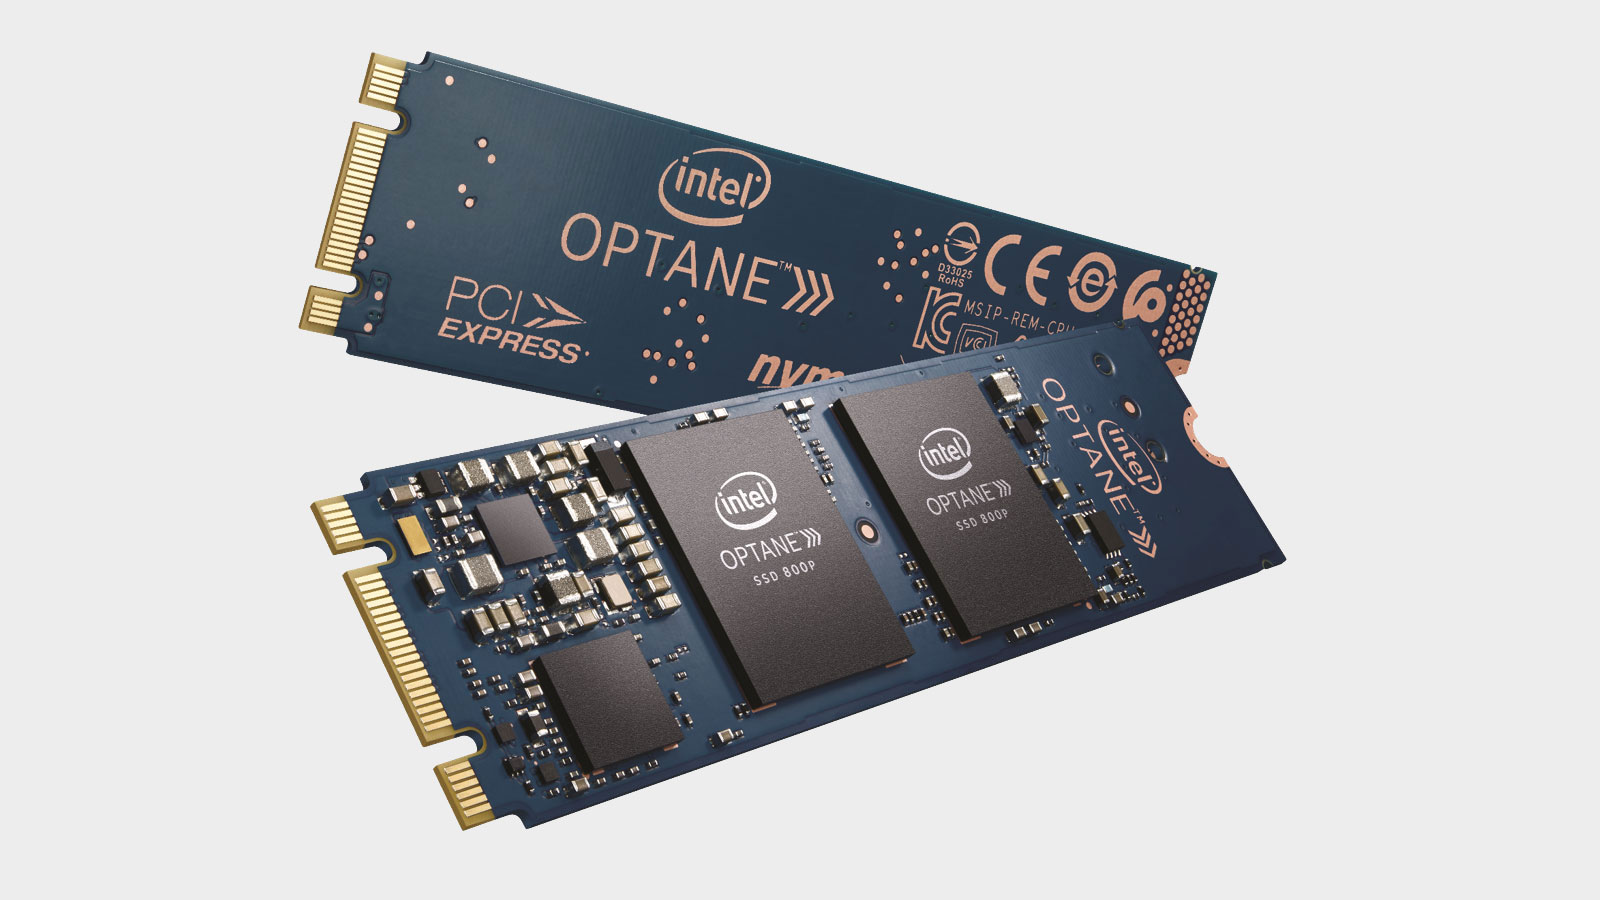  Intel's Optane business is hurtling towards an unglorified end 